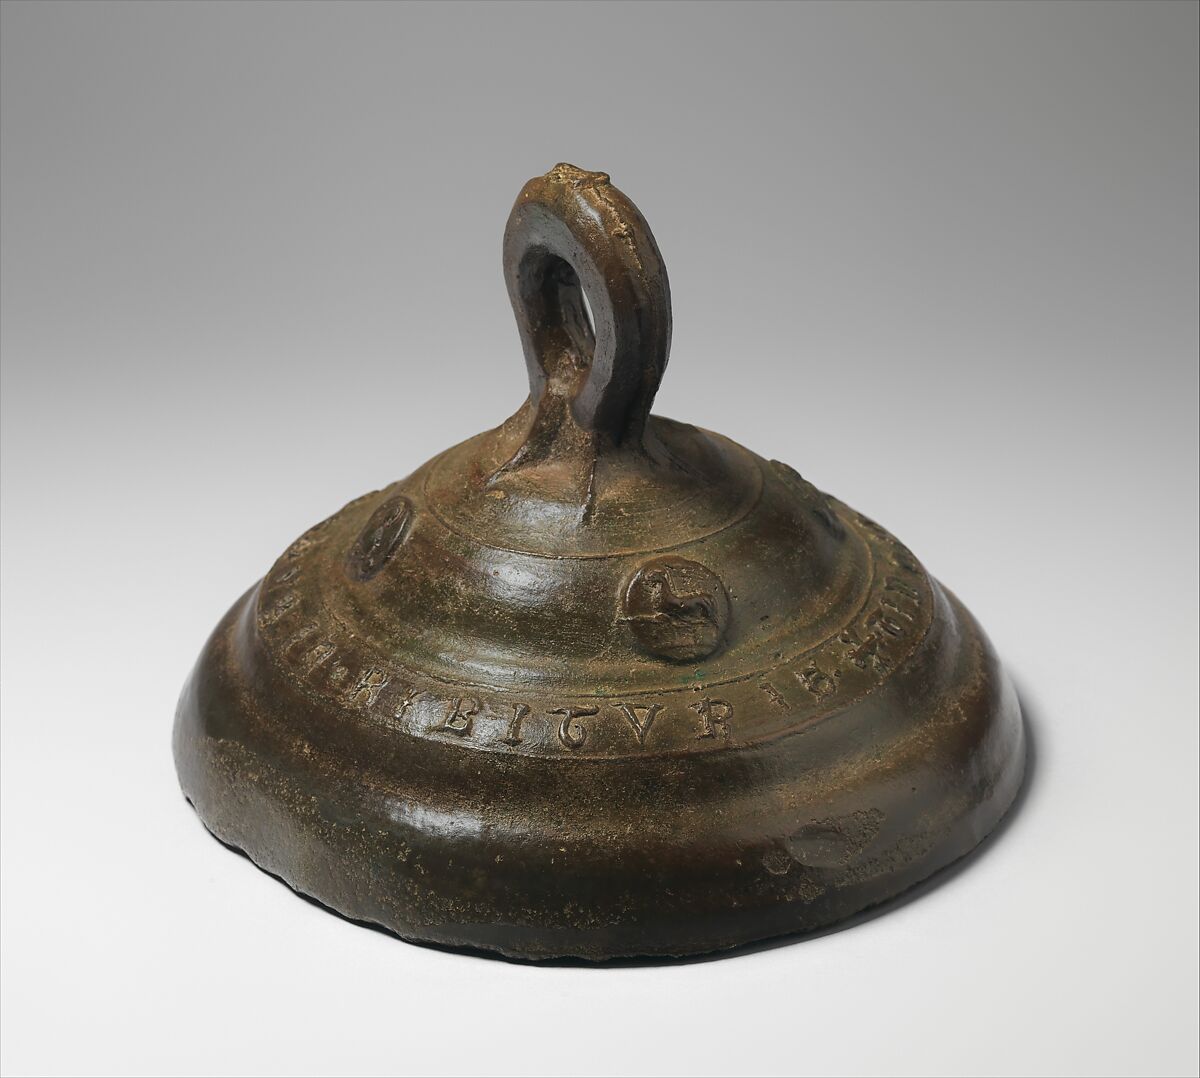 Refectory Bell, Copper alloy, German 